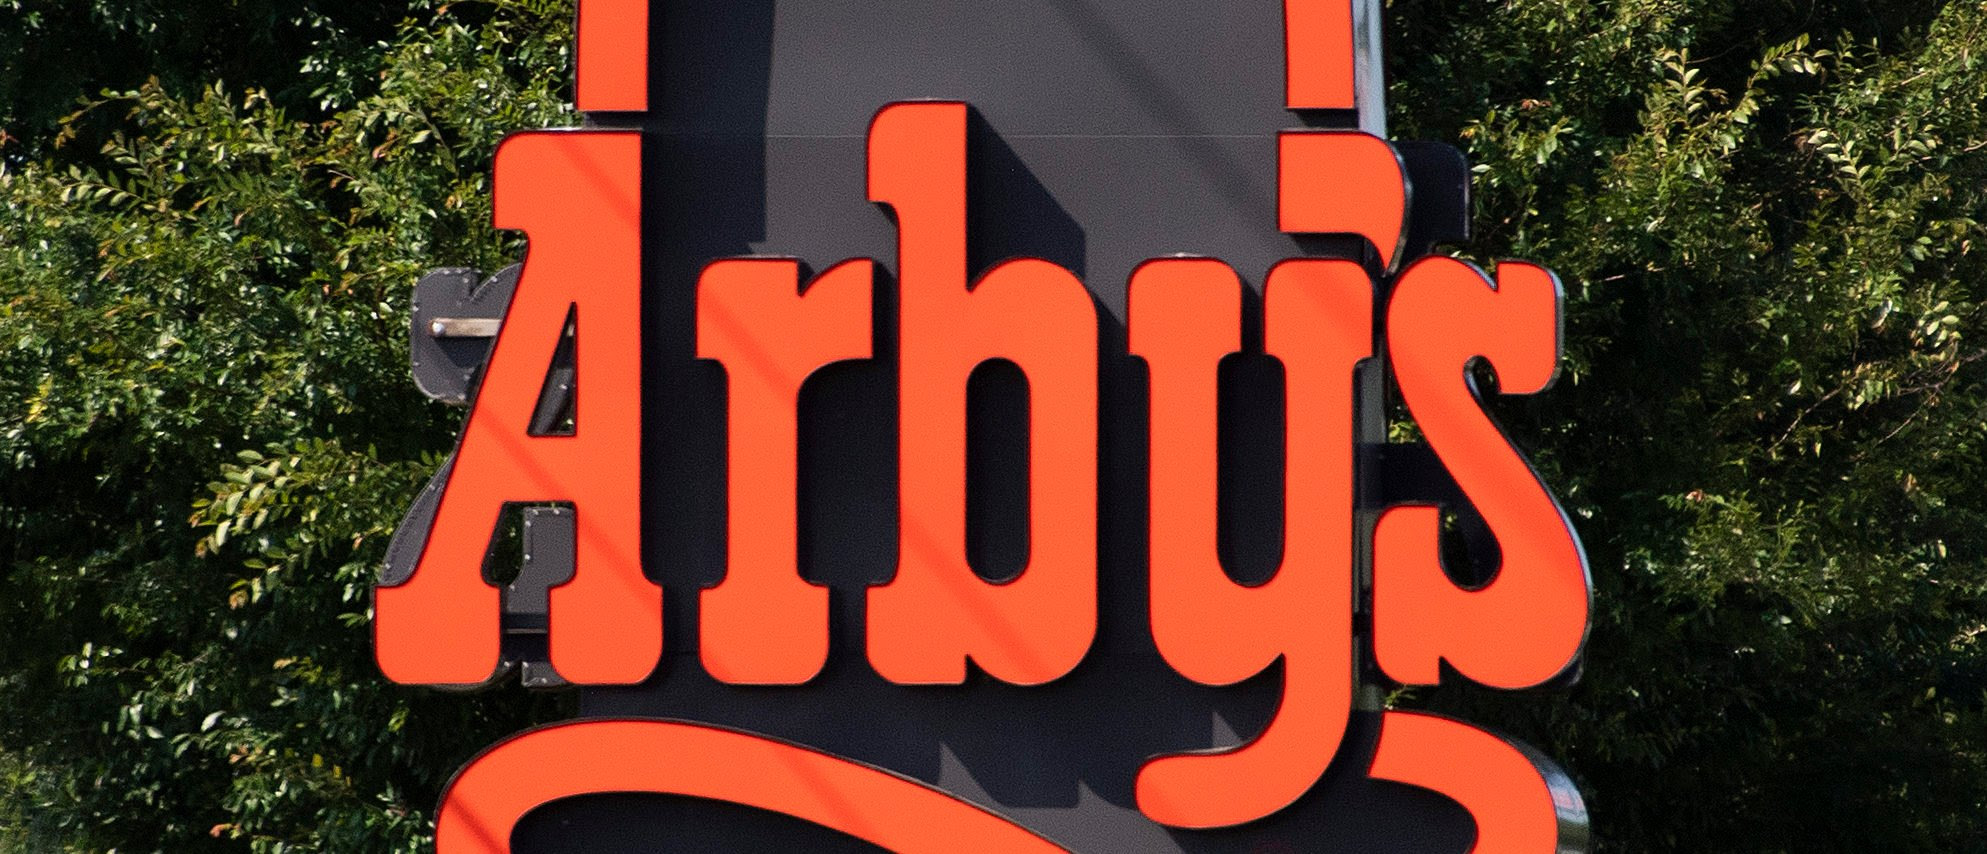 Arby’s Night Manager Allegedly Urinated In Milkshakes For Sexual Gratification